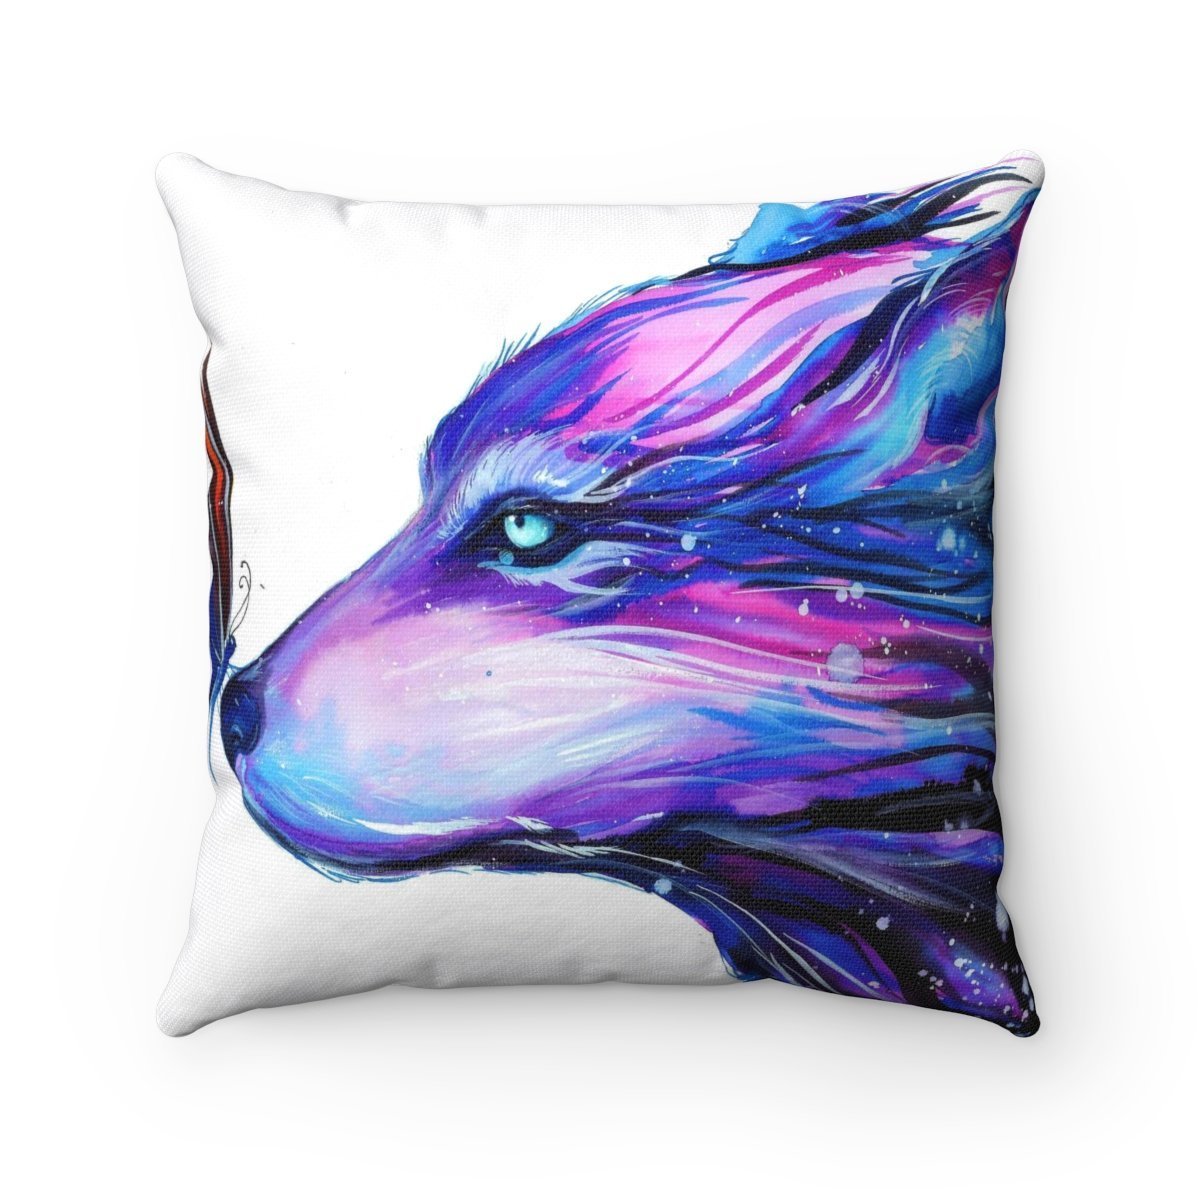 Home Decor Two Galaxies Pillow - iEDM